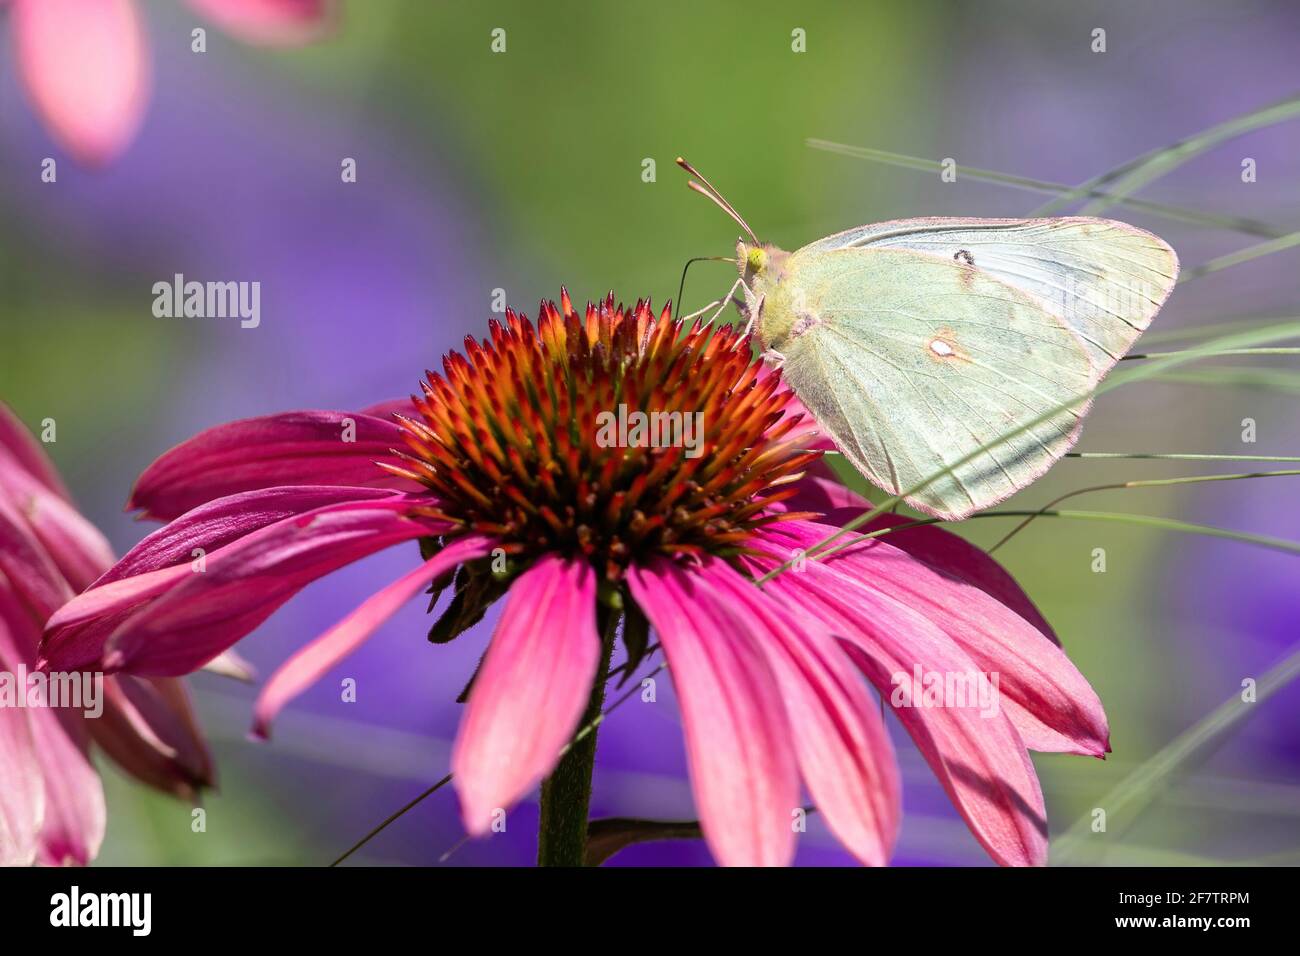 Closeup of a Orange Sulphur butterfly of the White Phase variety pollinating atop a bright pink Echinacea flower in a colorful garden setting. Stock Photo